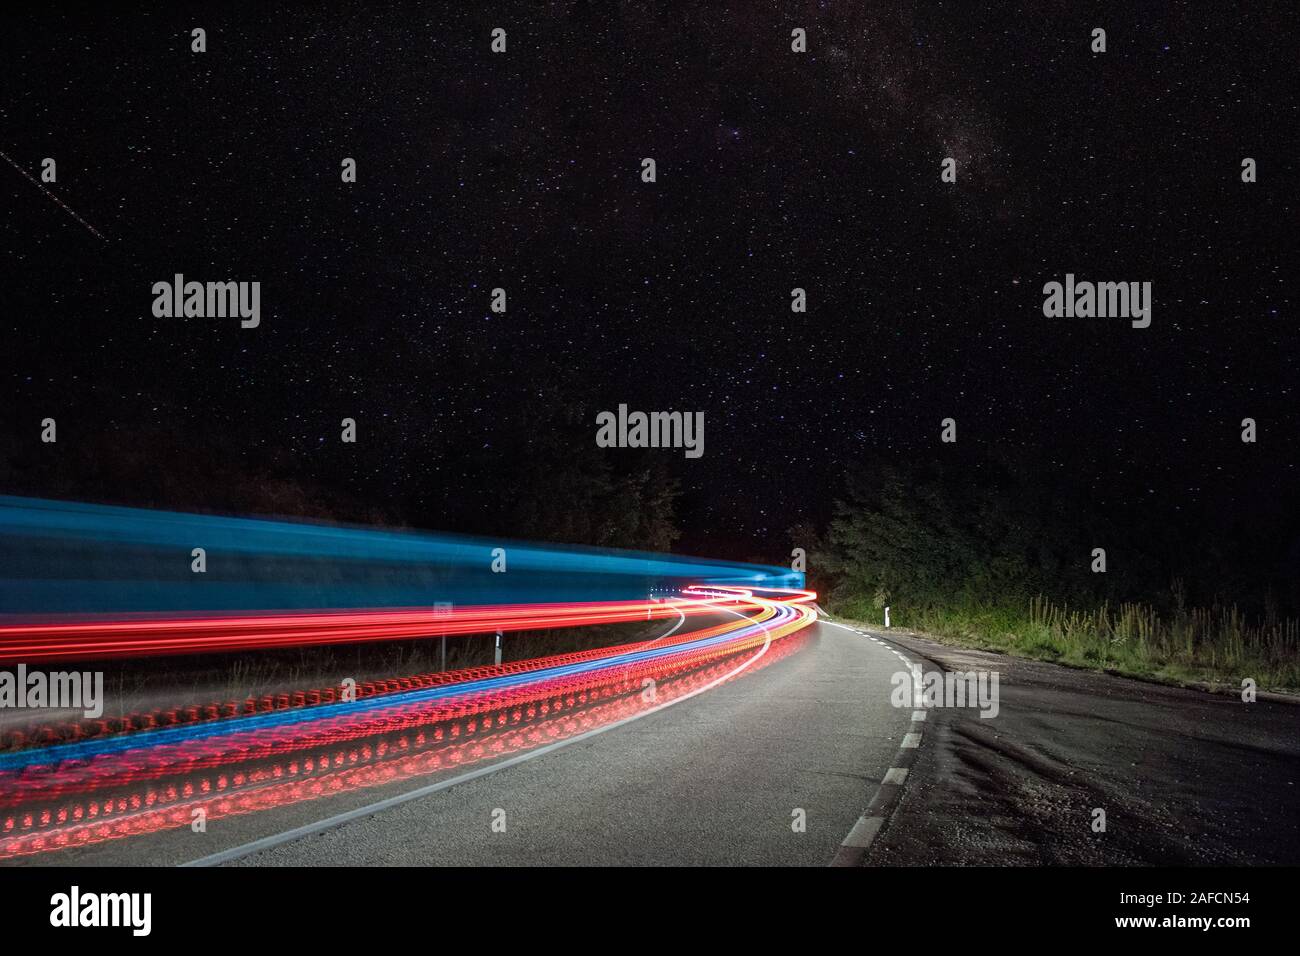 Photo of colorful car light trails and stars at night, long exposure. Stock Photo